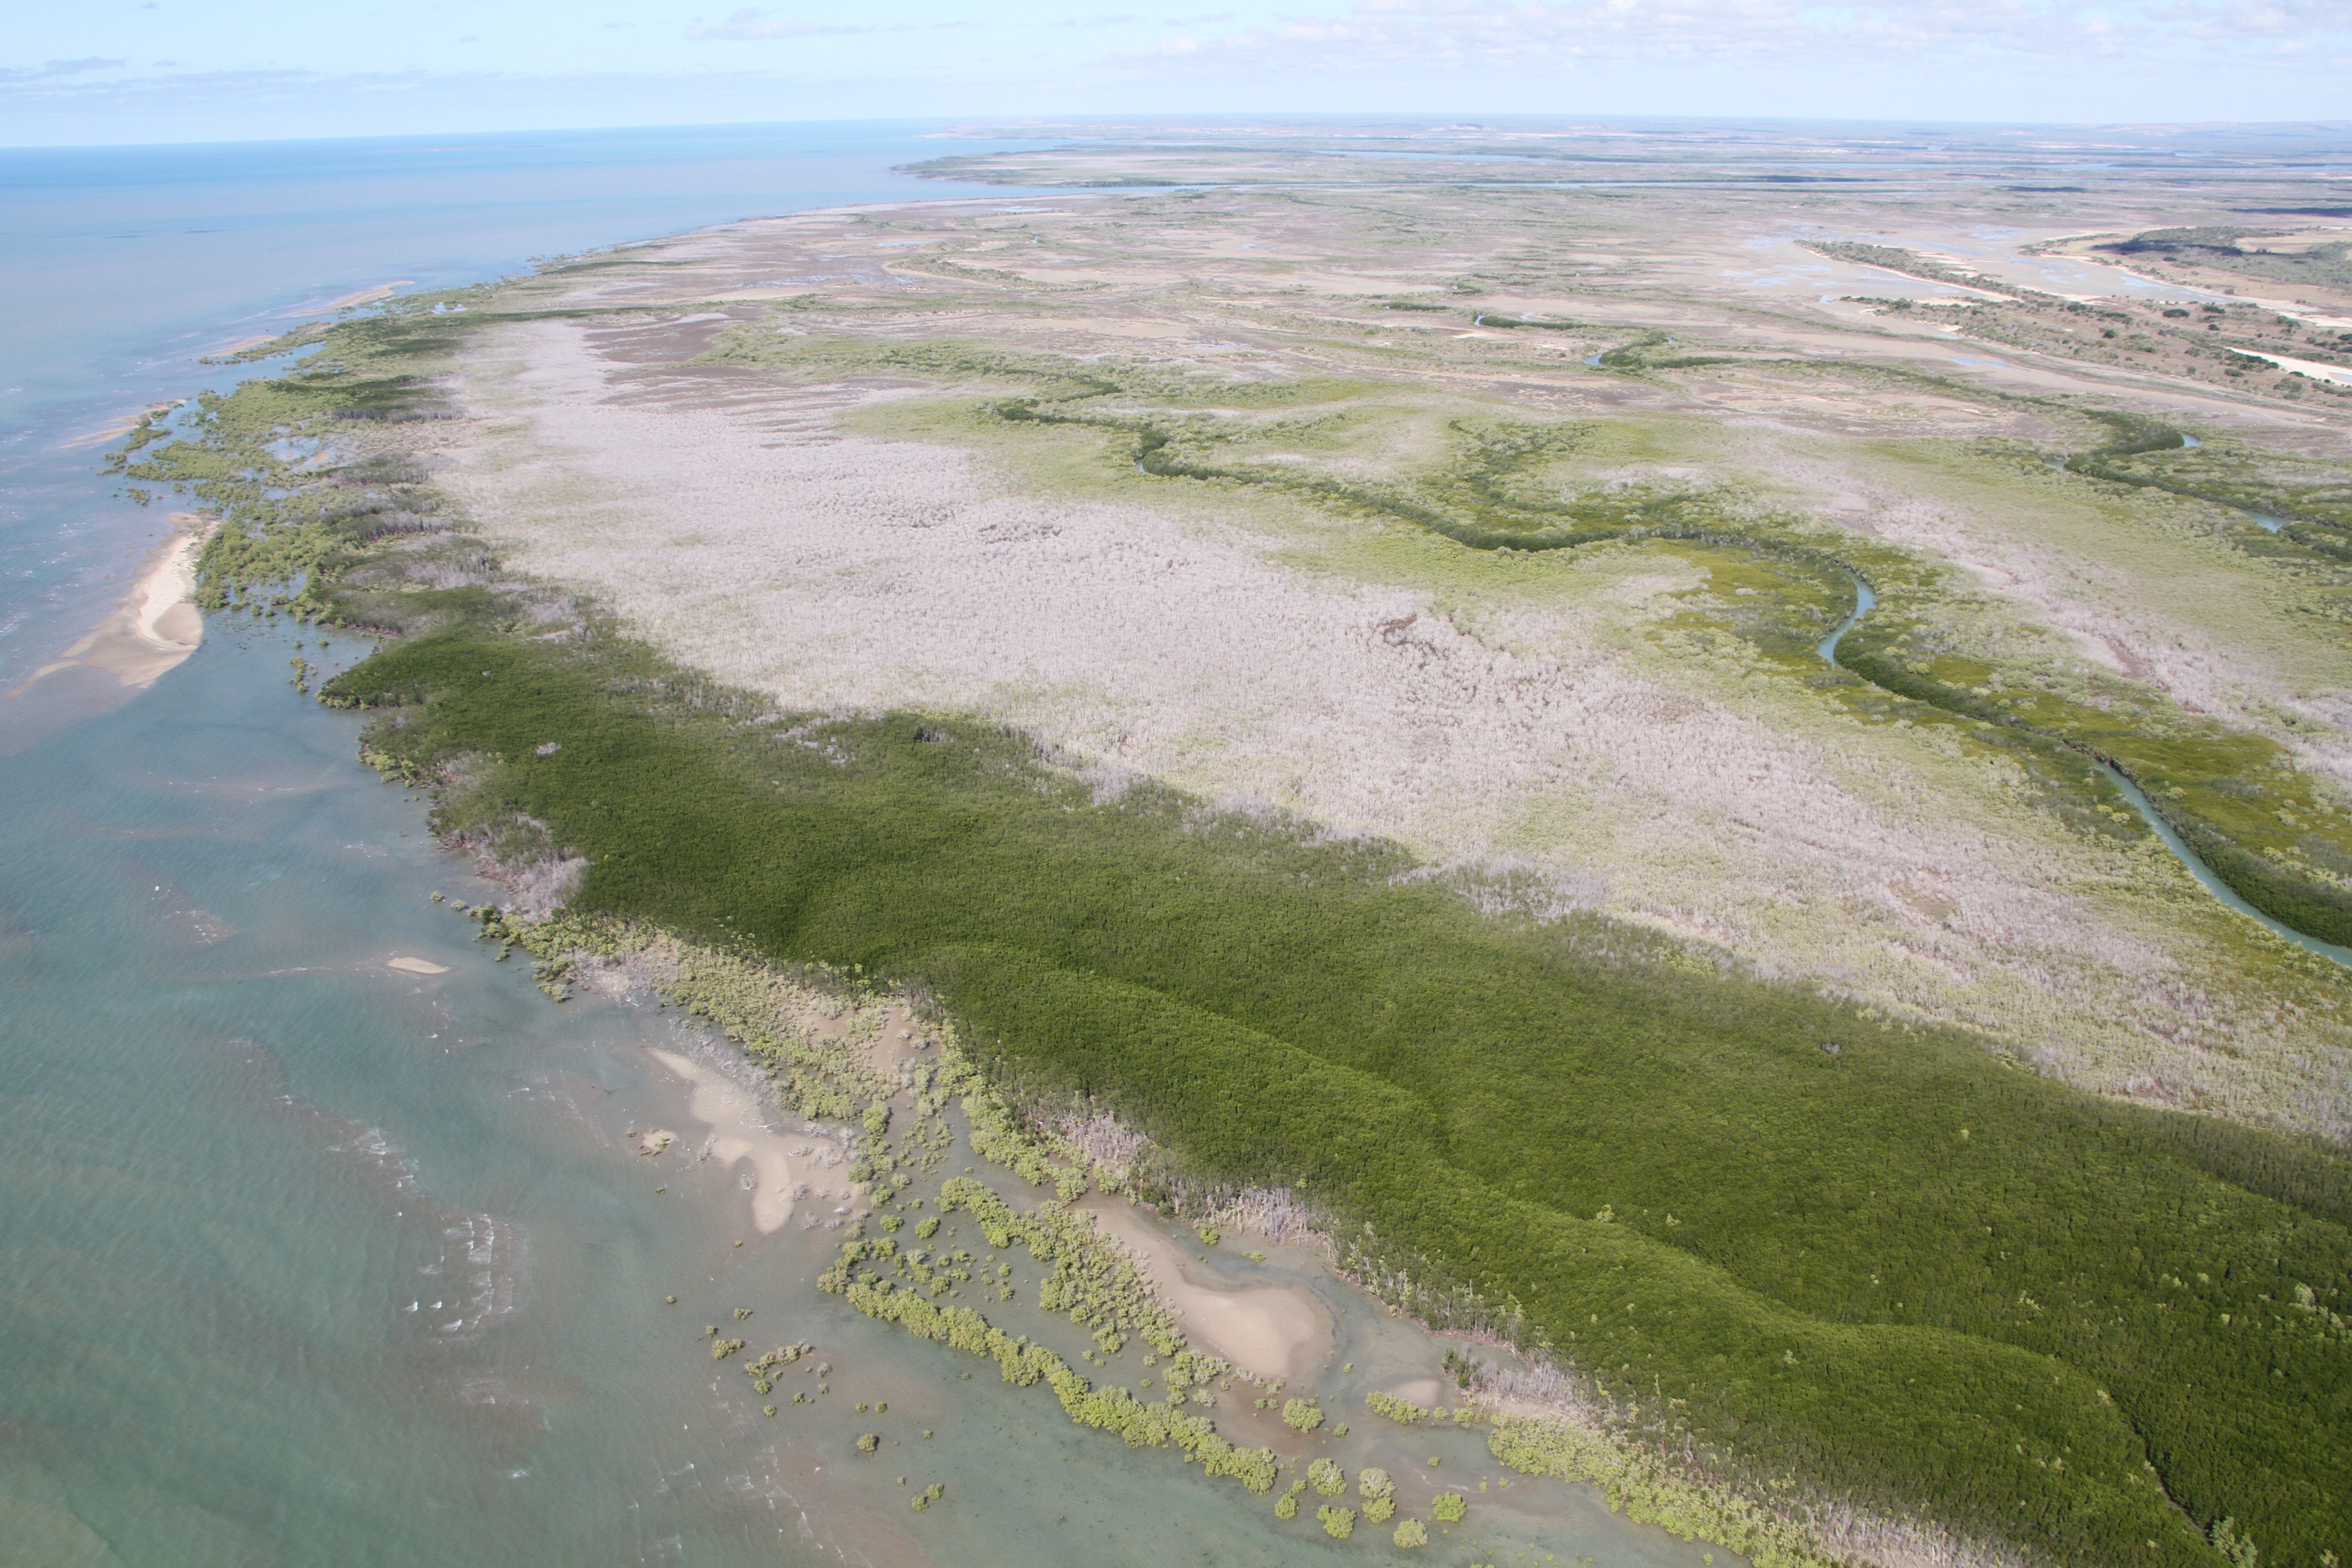 This undated handout photo released by James Cook University on July 11, 2016 shows a vast area of dead mangroves in the Gulf of Carpentaria, in Australia's remote north. Thousands of hectares of mangroves in Australia's remote north have died, scientists said on July 11, with climate change the likely cause. Some 7,000 hectares (17,300 acres), or nine percent of the mangroves in the Gulf of Carpentaria, perished in just one month according to researchers from Australia's James Cook University, the first time such an event has been recorded.  / AFP PHOTO / JAMES COOK UNIVERSITY / STR / --- EDITORS NOTE --- RESTRICTED TO EDITORIAL USE - MANDATORY CREDIT "AFP PHOTO / JAMES COOK UNIVERSITY" - NO MARKETING NO ADVERTISING CAMPAIGNS - DISTRIBUTED AS A SERVICE TO CLIENTS - NO ARCHIVES